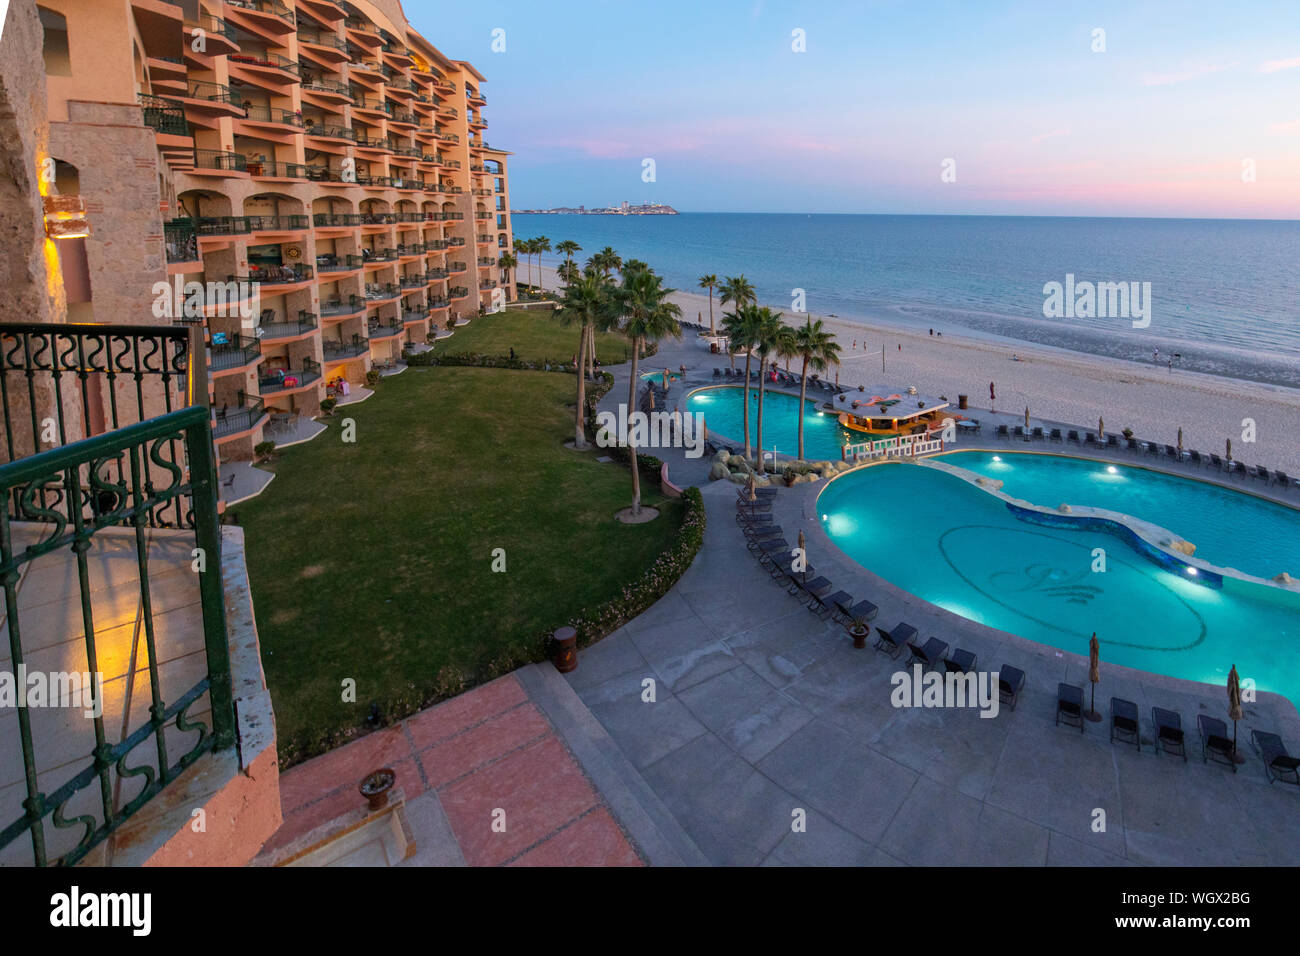 Hotel and resort, Rocky Point, Mexico. Stock Photo